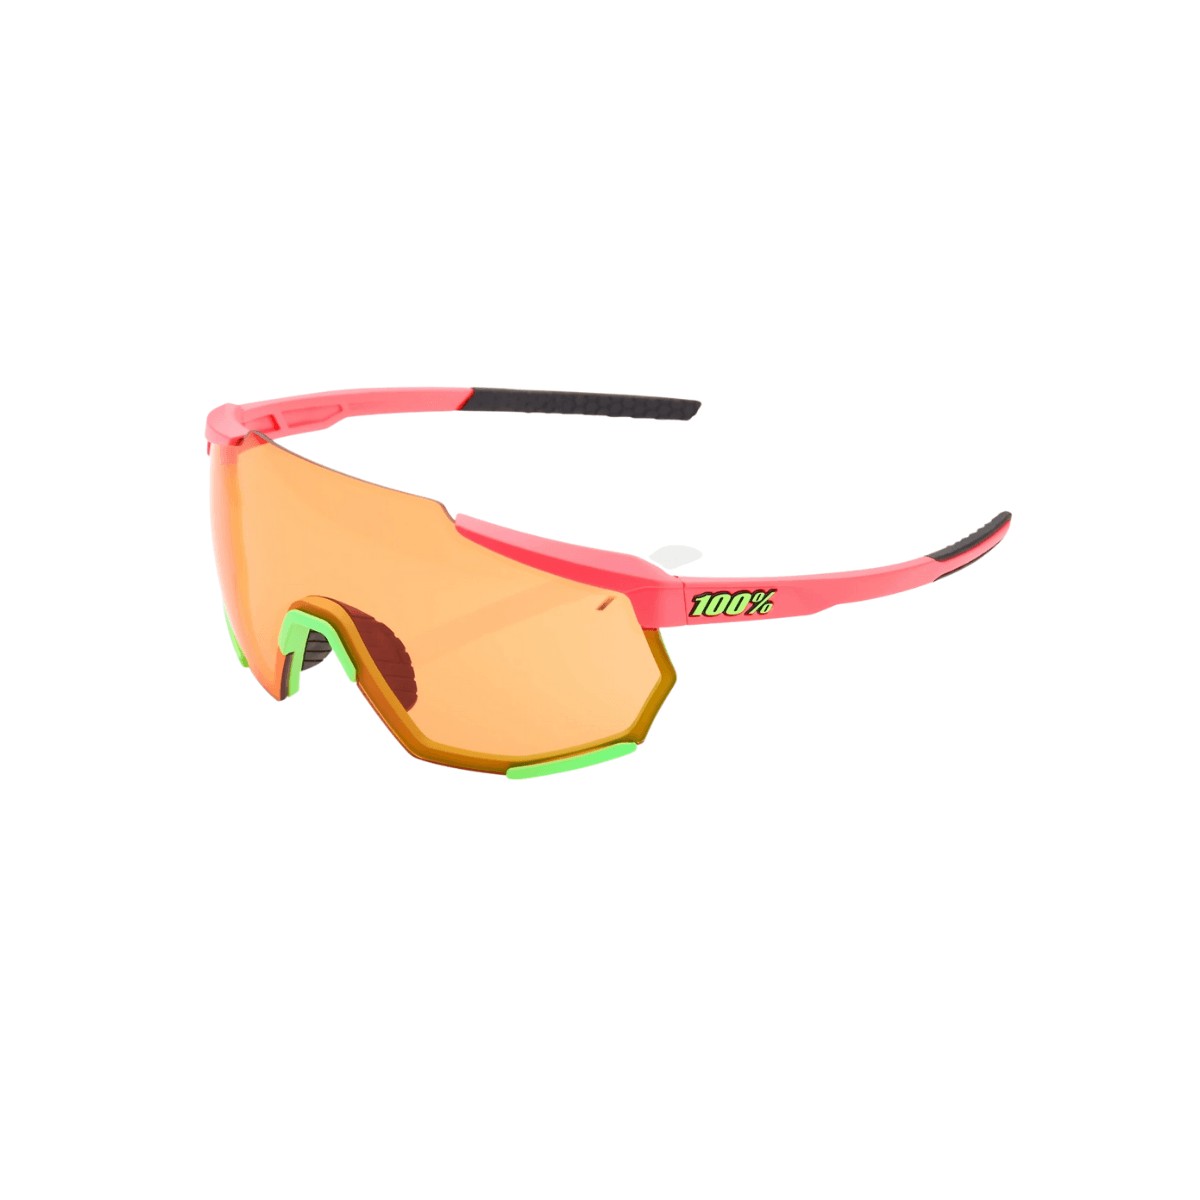 100% Racetrap Goggles - Matte Washed Out Neon Pink - Persimmon Gläser